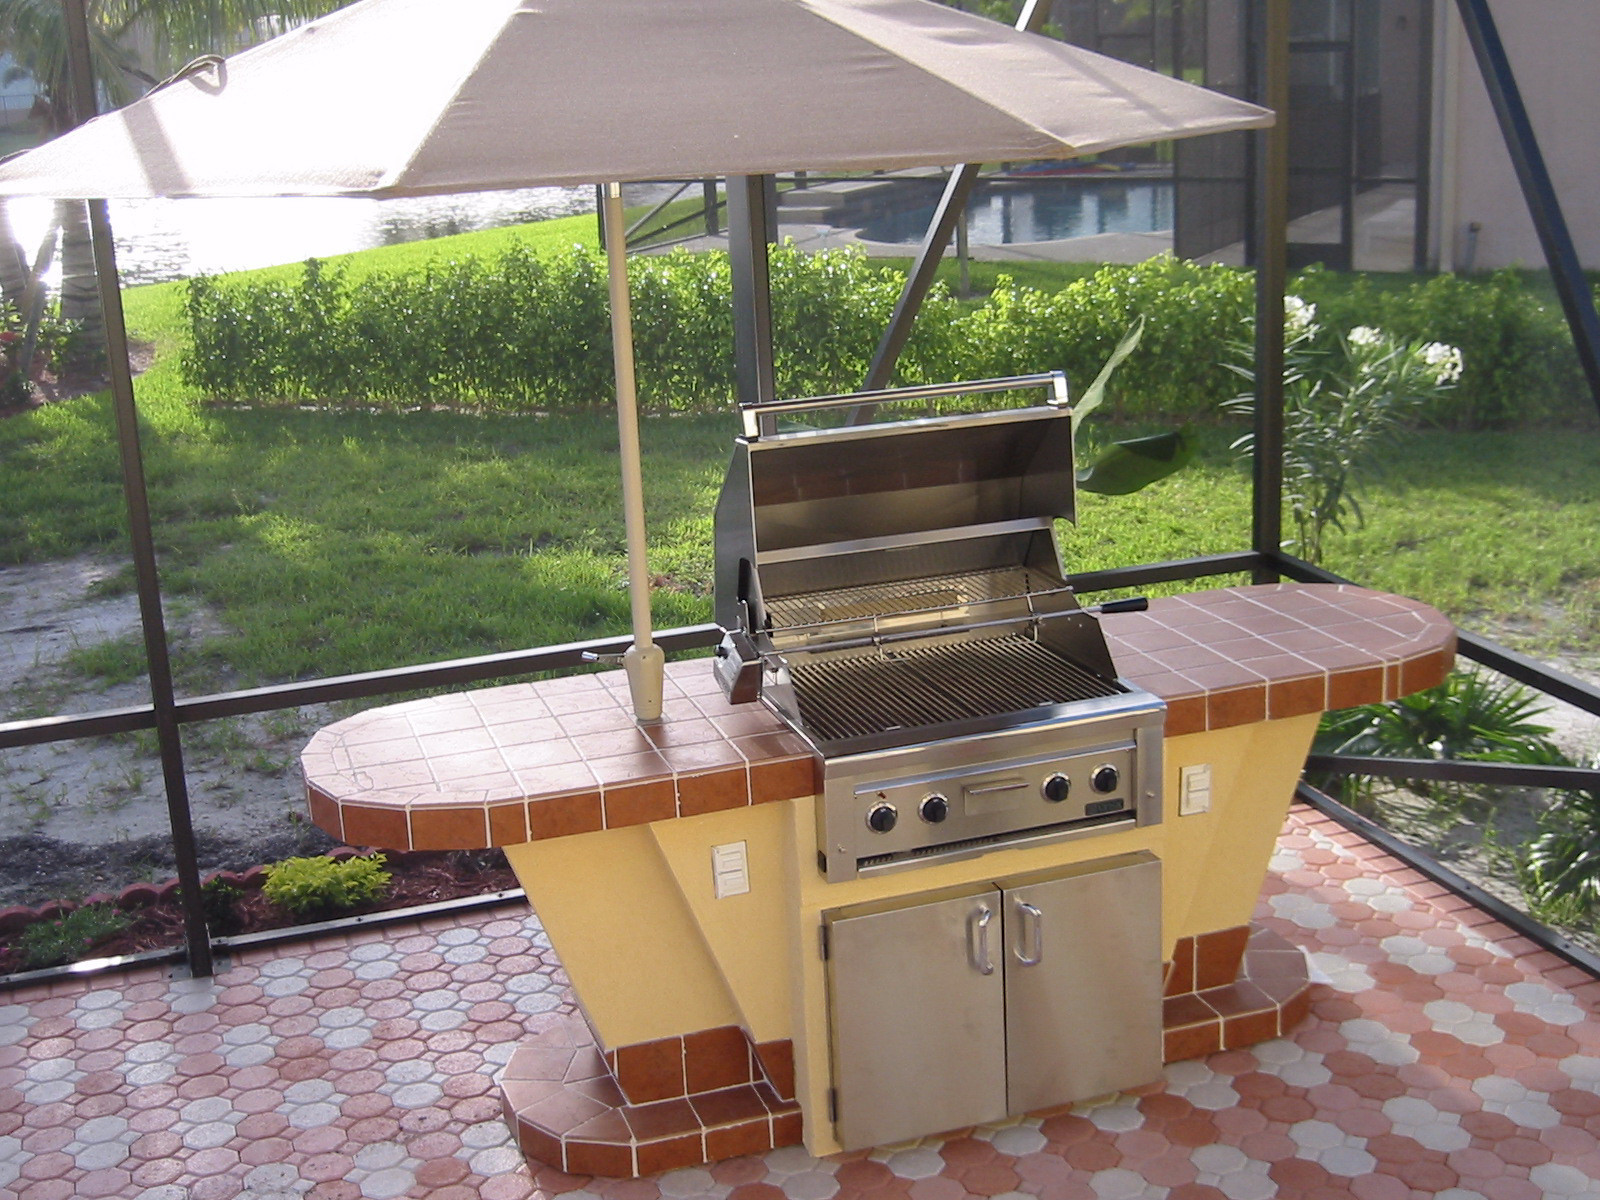 Diy Outdoor Kitchen Kits
 35 Best Diy Outdoor Kitchen Kits Home Inspiration and